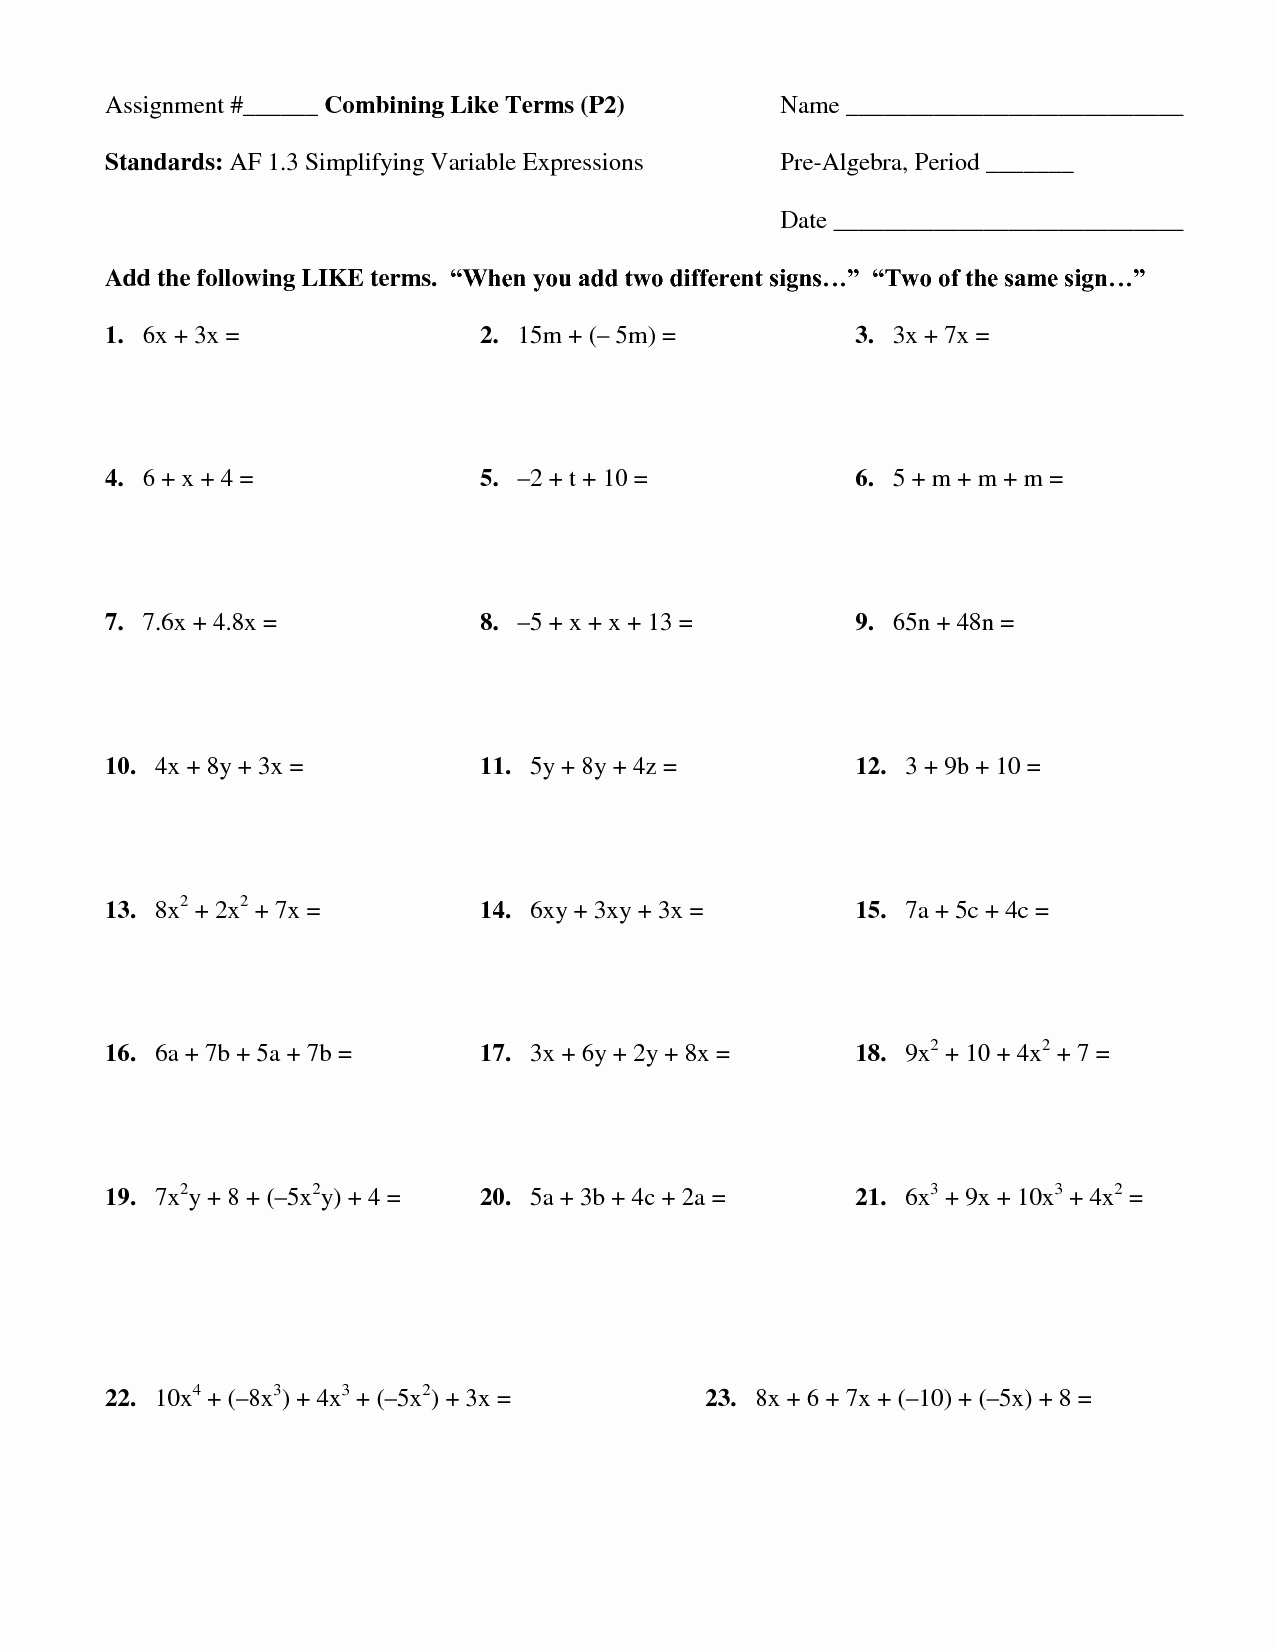 Combining Like Terms Worksheet Answers Lovely 13 Best Of Bining Like Terms Worksheet Answer